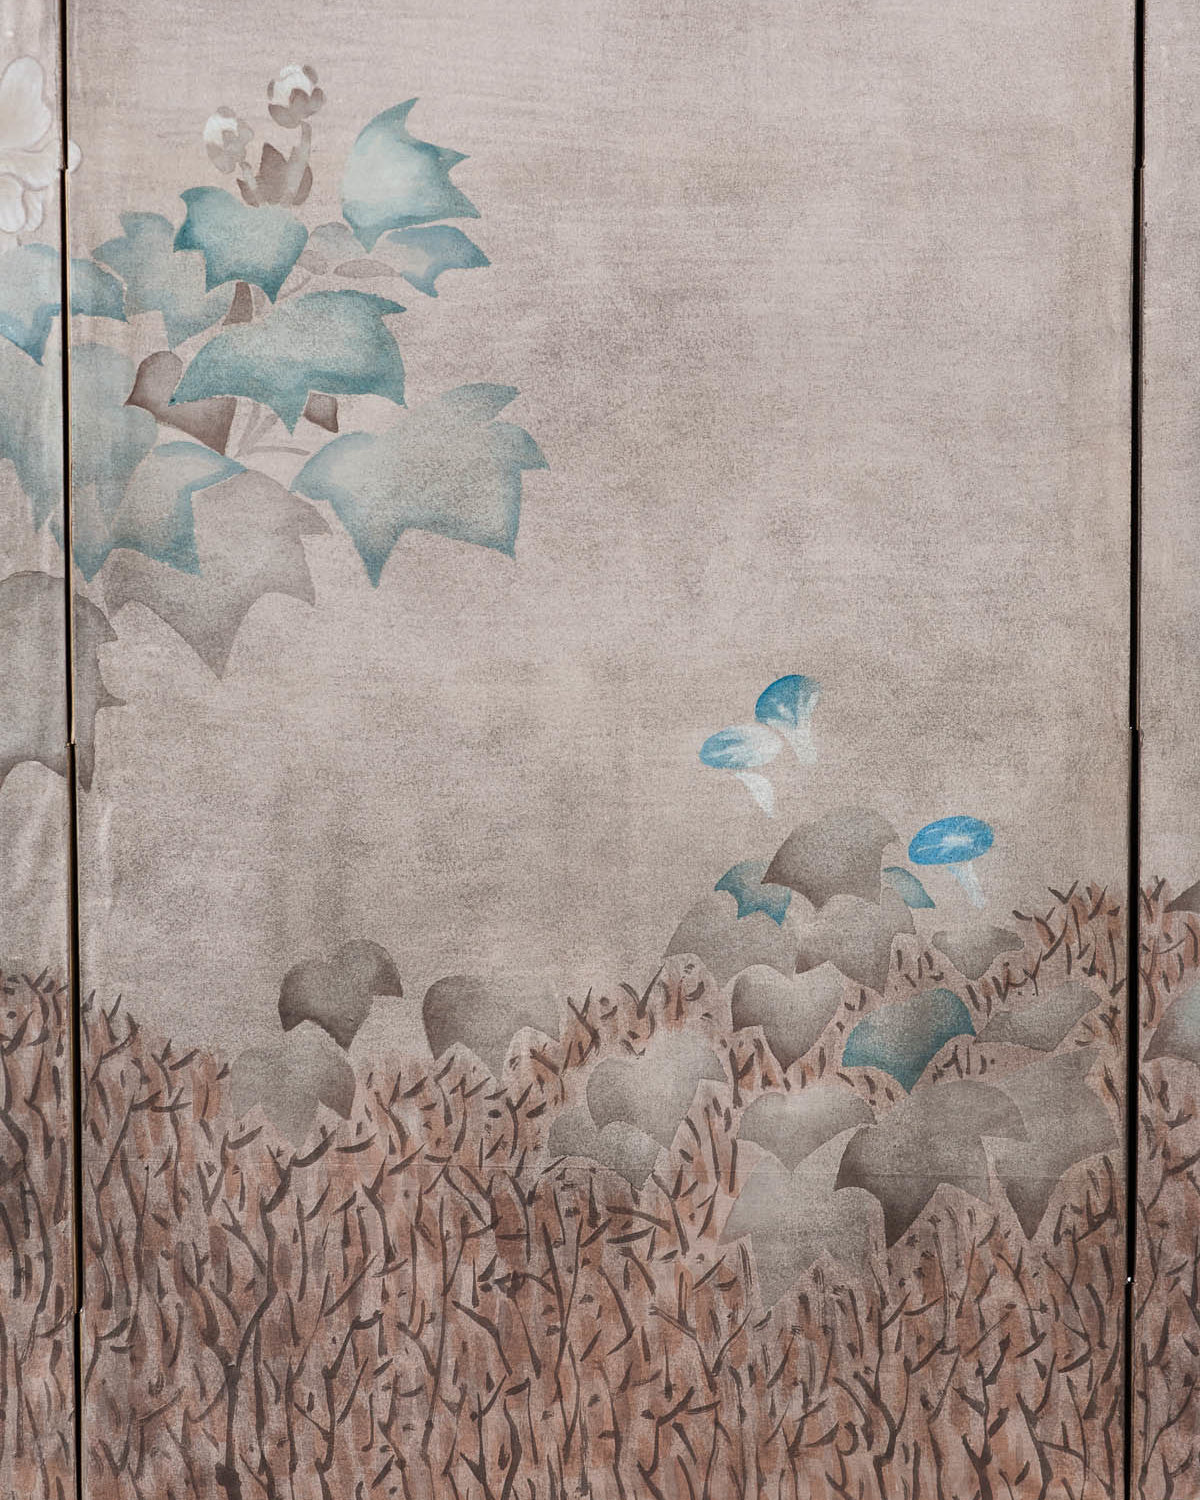 Lawrence & Scott Sung Tze-Chin Large Chinoiserie Hanging Screen Ink on Paper "Brushed Wood Fence With Chrysanthemum" 11 Feet Wide by 6 Feet Height